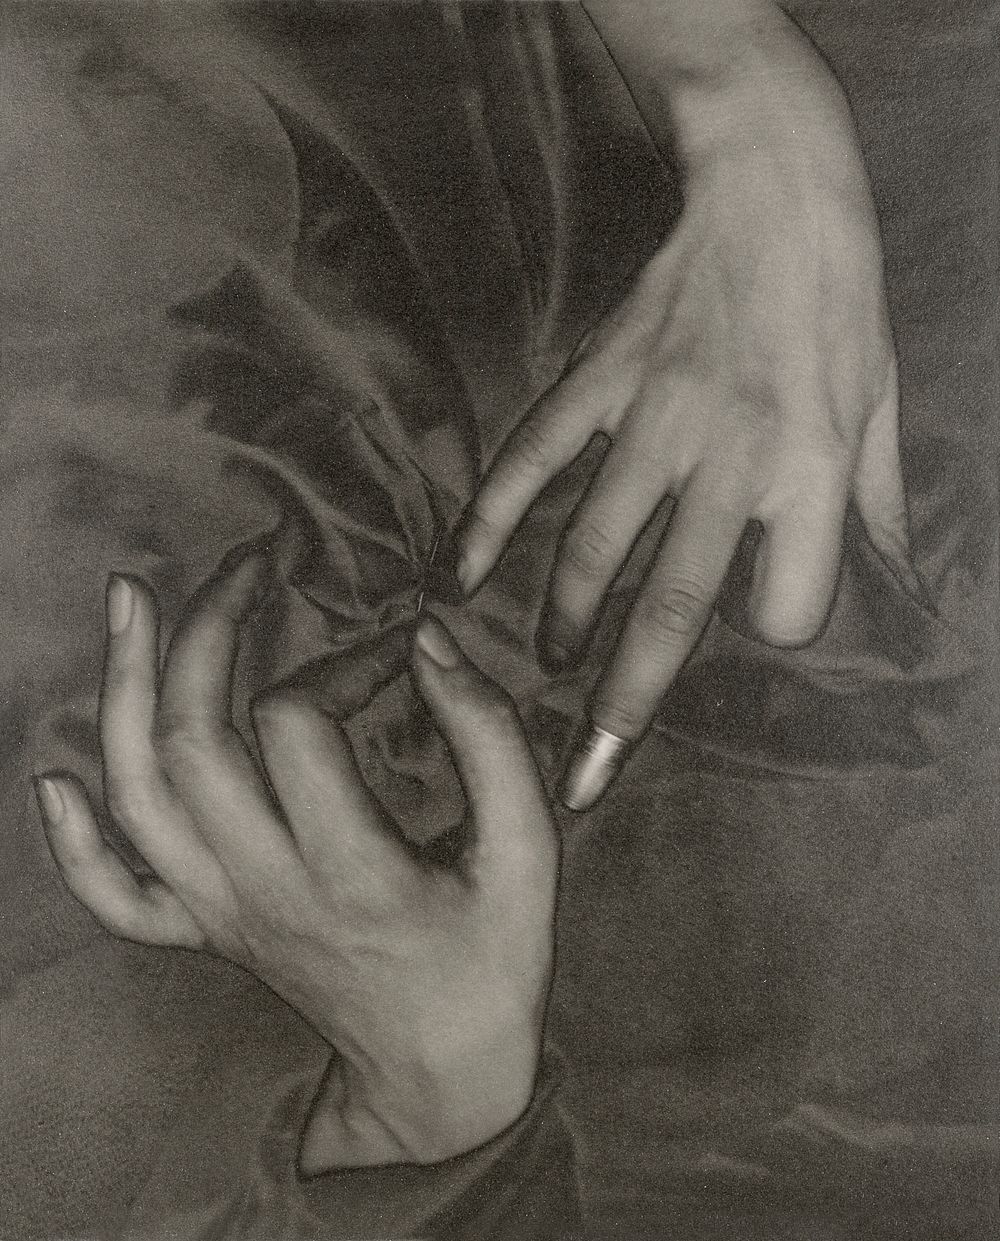 Georgia O&rsquo;Keeffe&mdash;Hands and Thimble (1919) by Alfred Stieglitz. Original from The Art Institute of Chicago.…